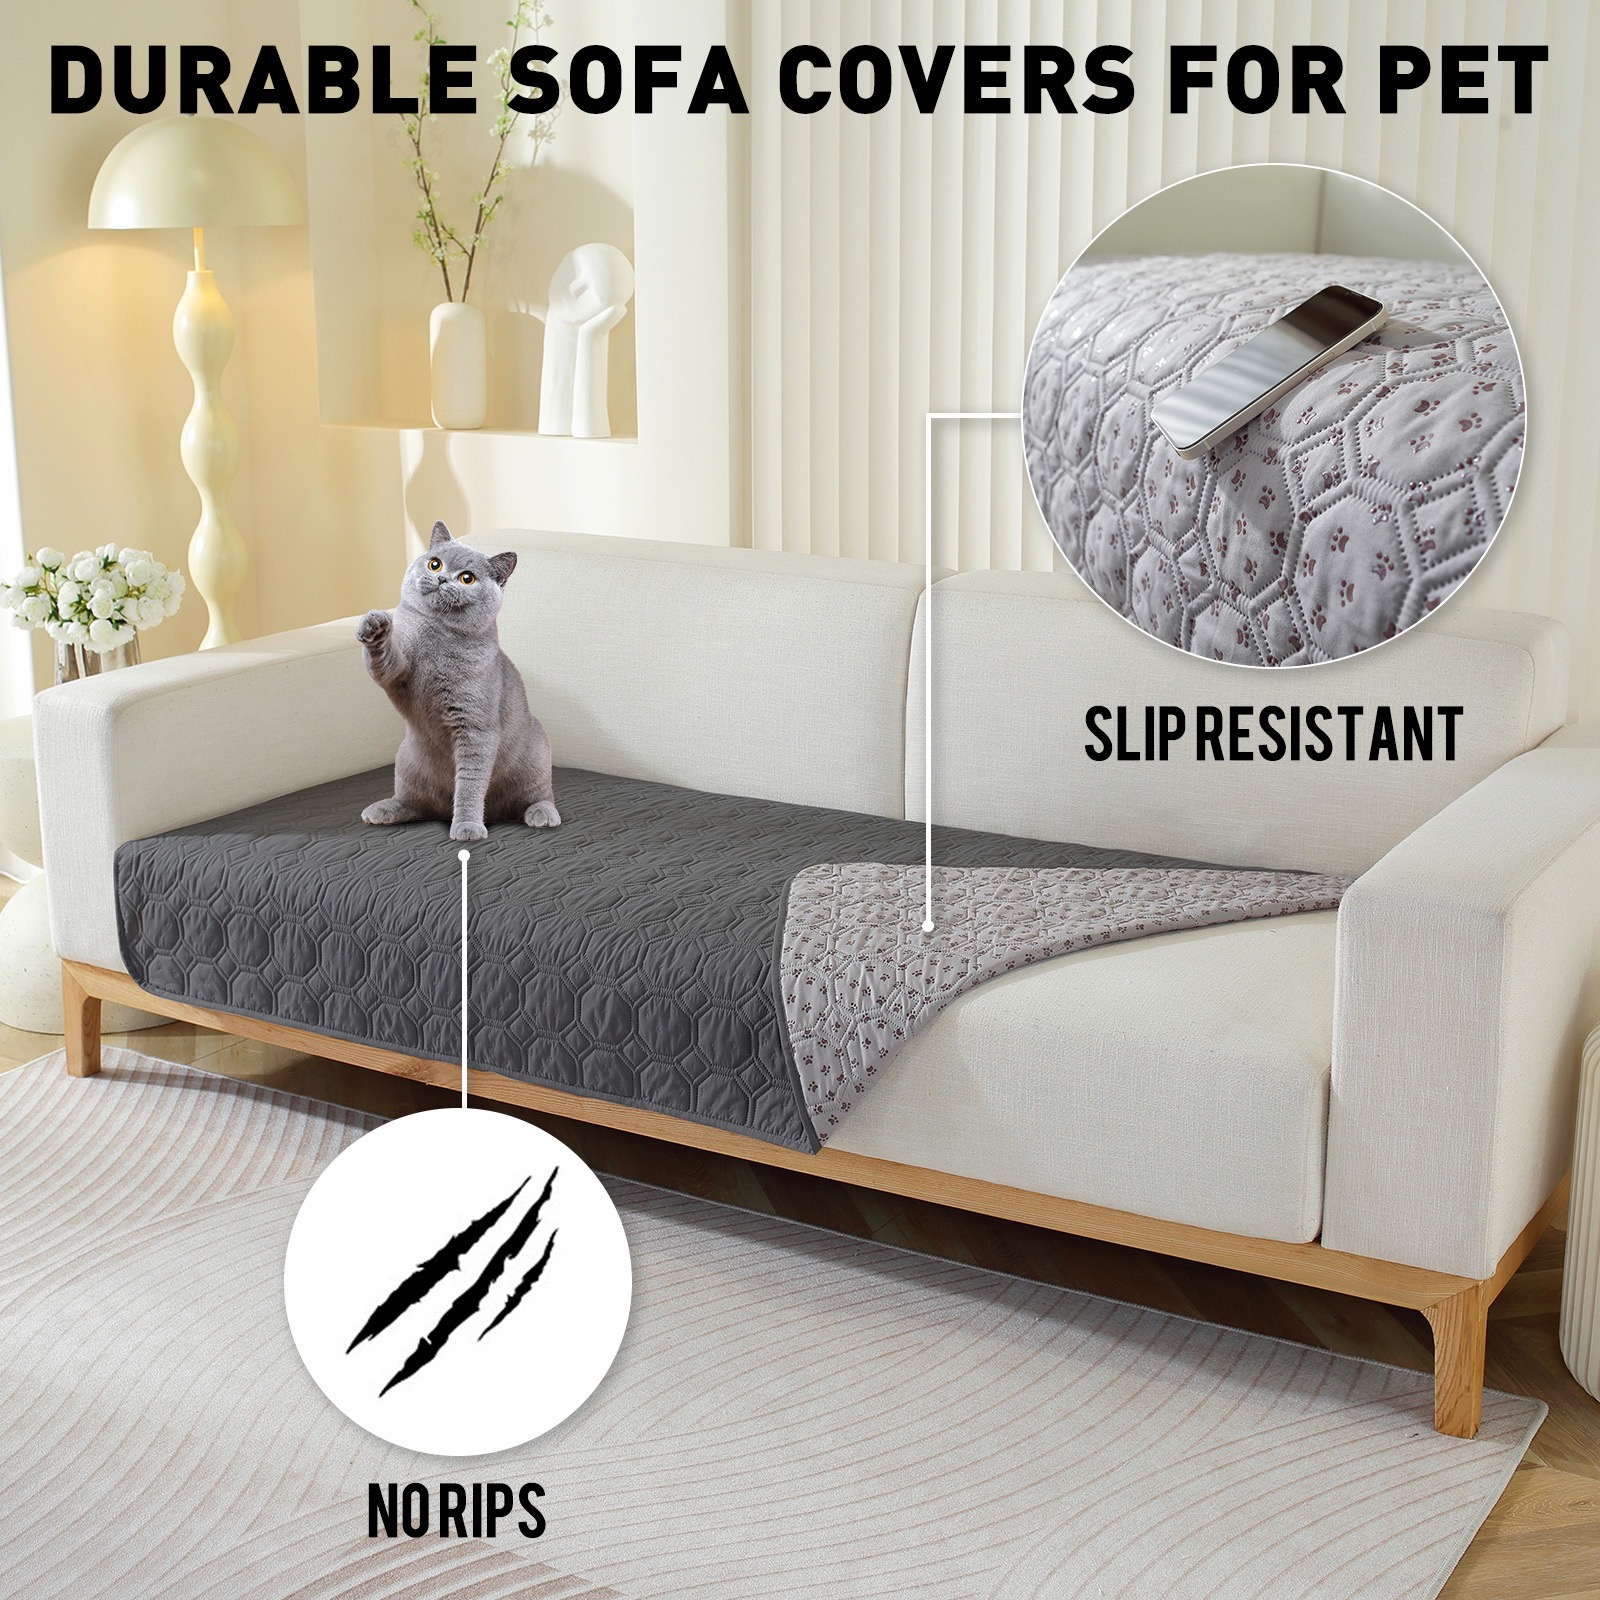 Sofa covers for pets